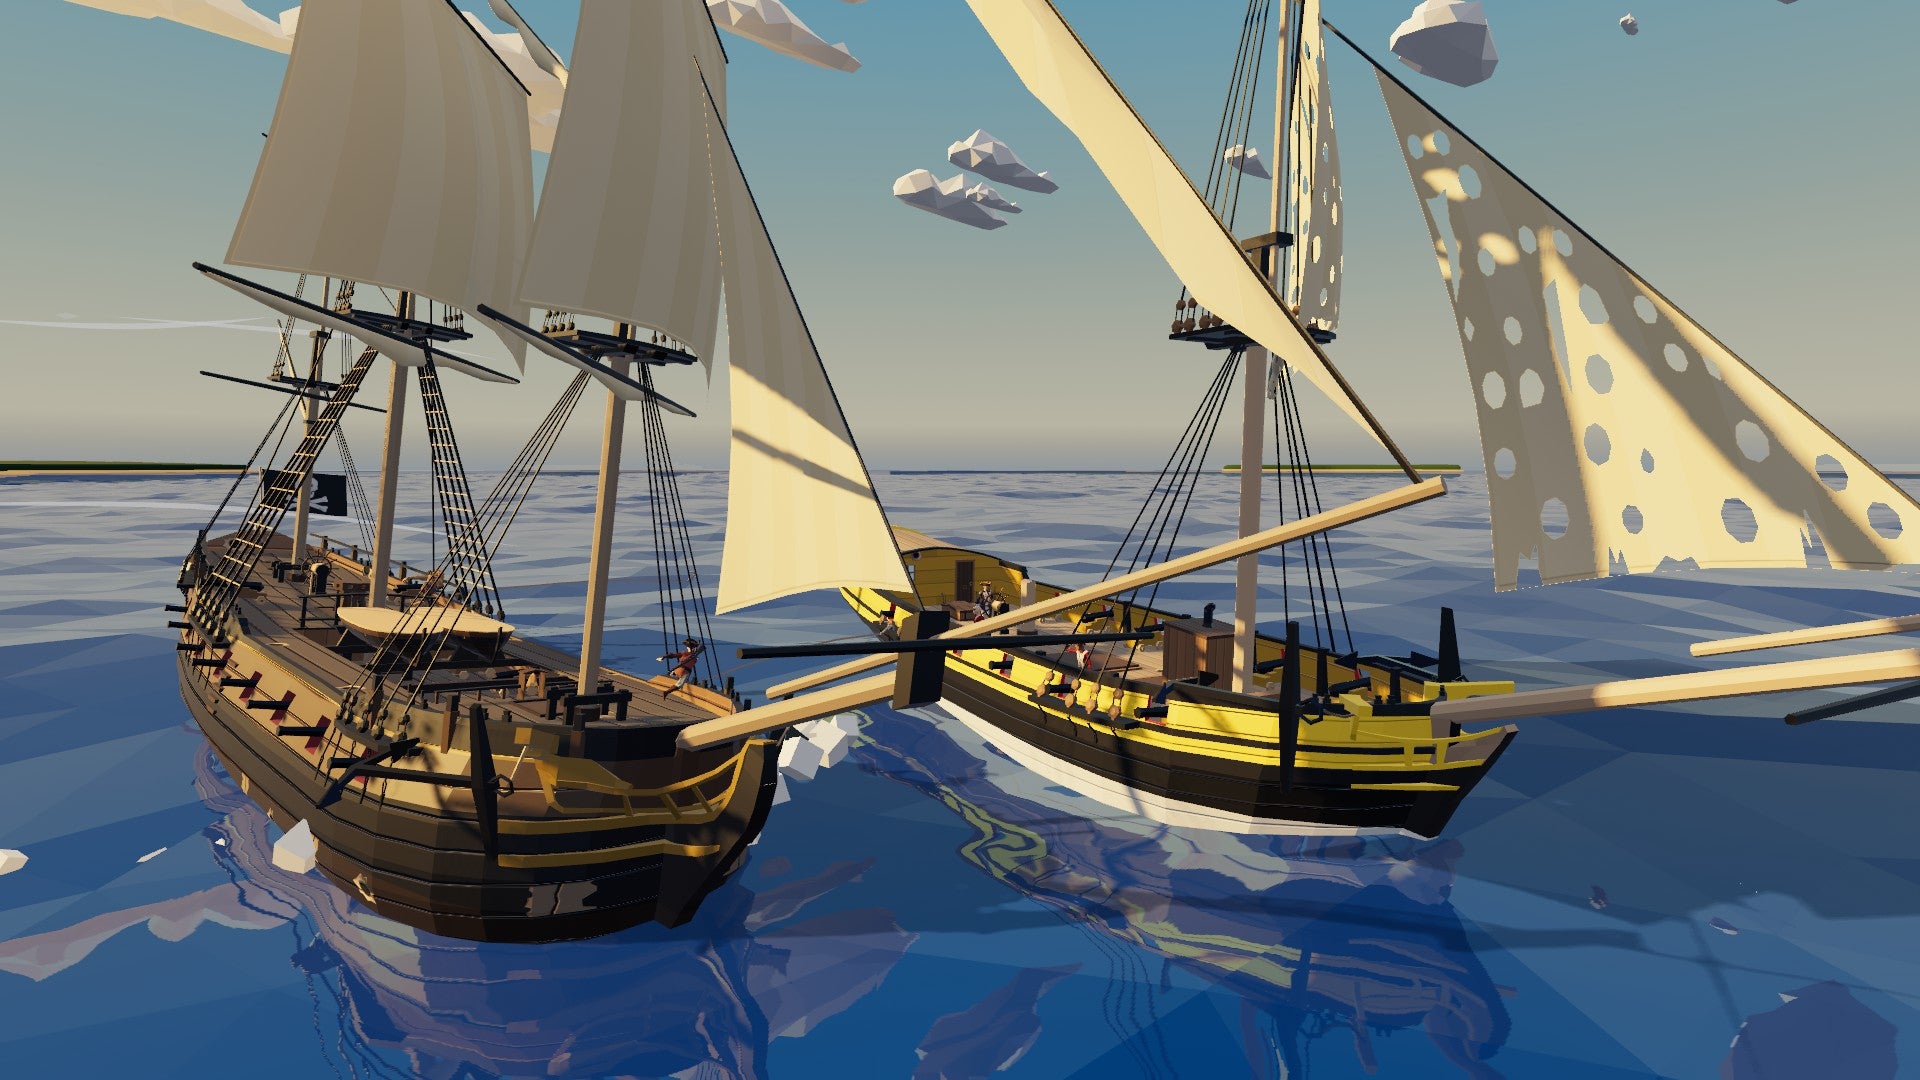 Two sailing ships square up to one another in Buccaneers